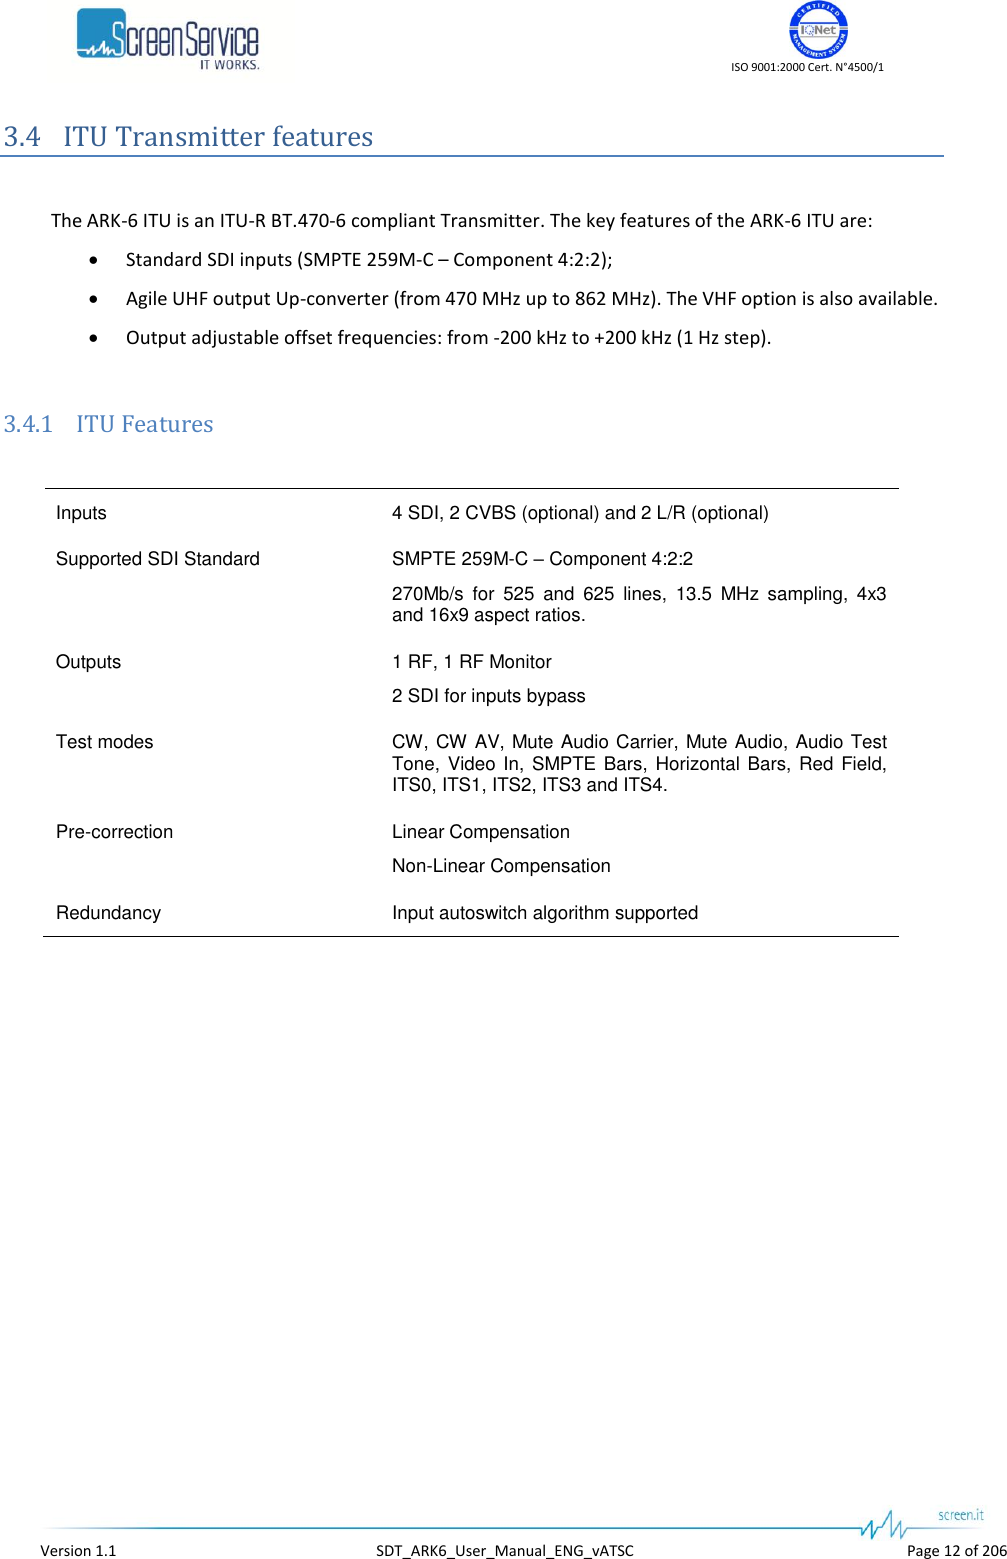    ISO 9001:2000 Cert. N°4500/1   Version 1.1  SDT_ARK6_User_Manual_ENG_vATSC  Page 12 of 206 3.4 ITU Transmitter features  The ARK-6 ITU is an ITU-R BT.470-6 compliant Transmitter. The key features of the ARK-6 ITU are:  Standard SDI inputs (SMPTE 259M-C – Component 4:2:2);  Agile UHF output Up-converter (from 470 MHz up to 862 MHz). The VHF option is also available.  Output adjustable offset frequencies: from -200 kHz to +200 kHz (1 Hz step).  3.4.1 ITU Features  Inputs 4 SDI, 2 CVBS (optional) and 2 L/R (optional) Supported SDI Standard SMPTE 259M-C – Component 4:2:2 270Mb/s  for  525  and  625  lines,  13.5  MHz  sampling,  4x3 and 16x9 aspect ratios. Outputs 1 RF, 1 RF Monitor 2 SDI for inputs bypass Test modes CW, CW AV, Mute Audio Carrier, Mute Audio, Audio Test Tone, Video In, SMPTE Bars, Horizontal Bars, Red Field, ITS0, ITS1, ITS2, ITS3 and ITS4. Pre-correction Linear Compensation Non-Linear Compensation Redundancy Input autoswitch algorithm supported  